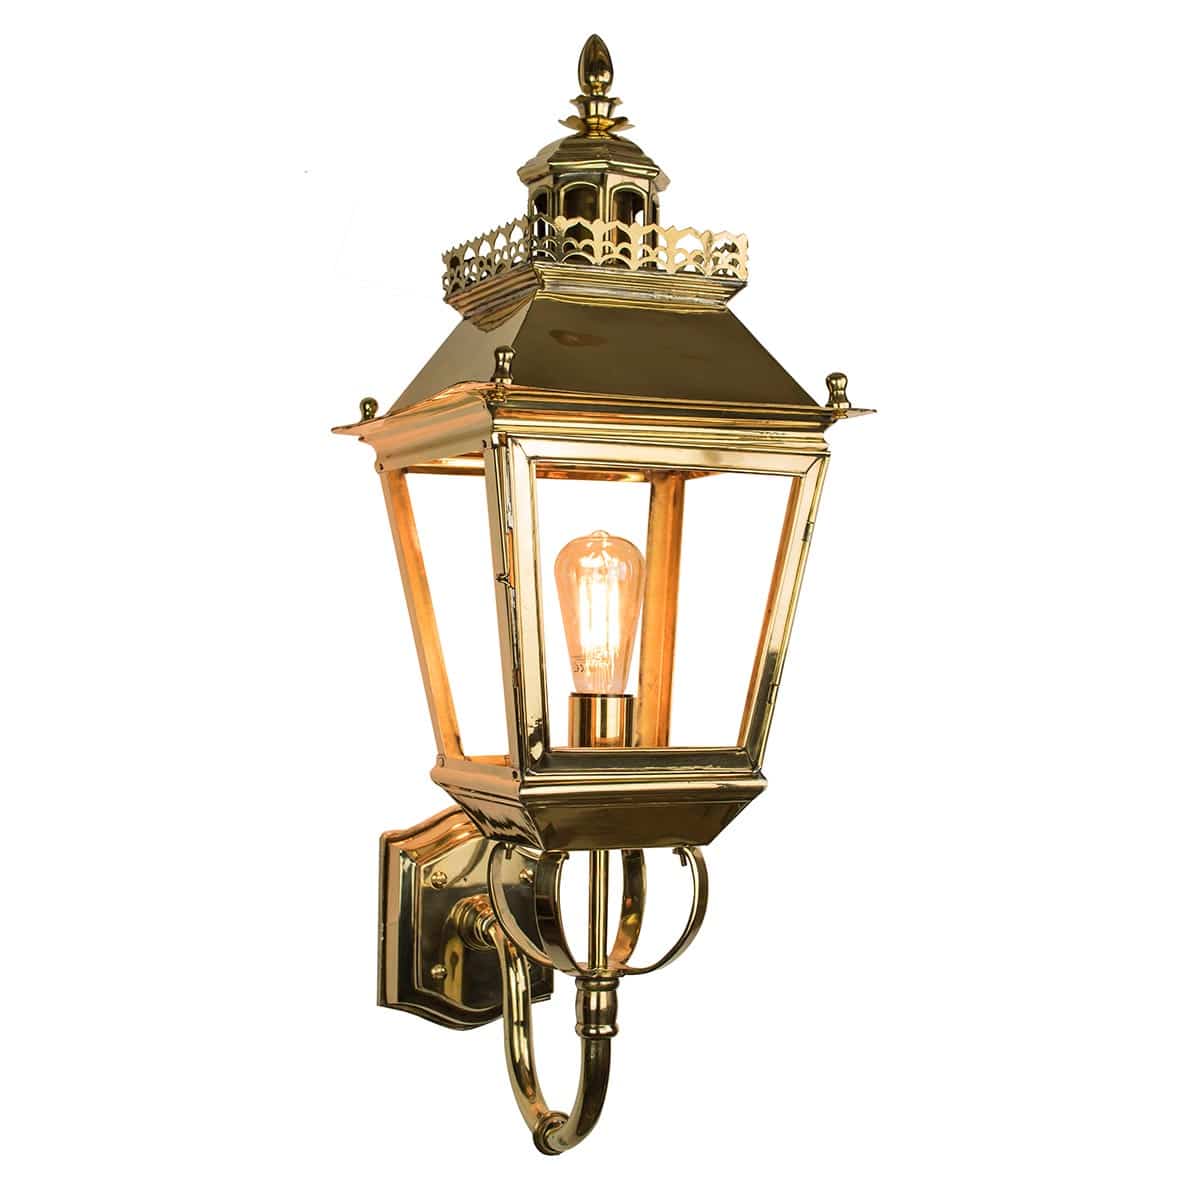 Chateau Small 1 Light Victorian Outdoor Wall Lantern Solid Brass